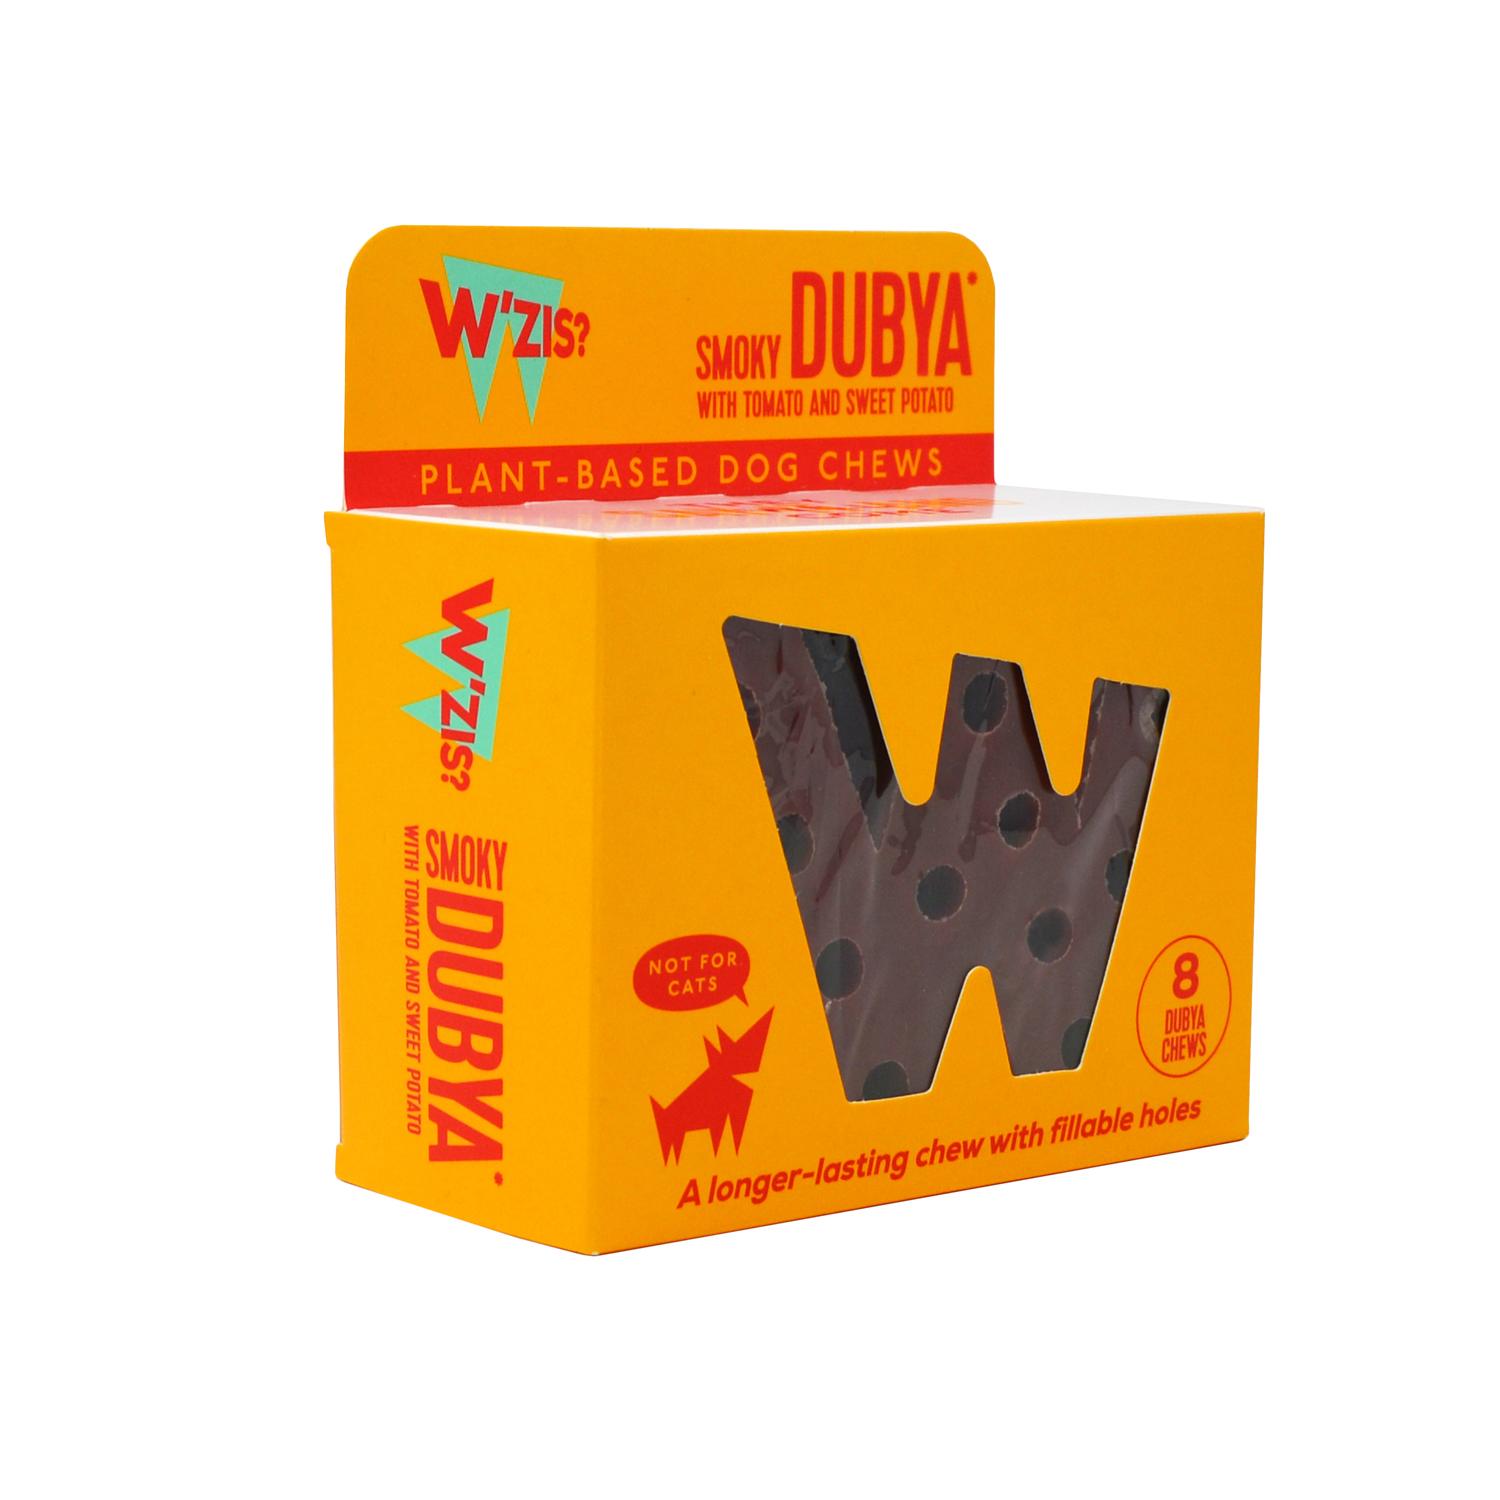 An angled pack of Smoky Dubya plant based dog chews from W'ZIS?